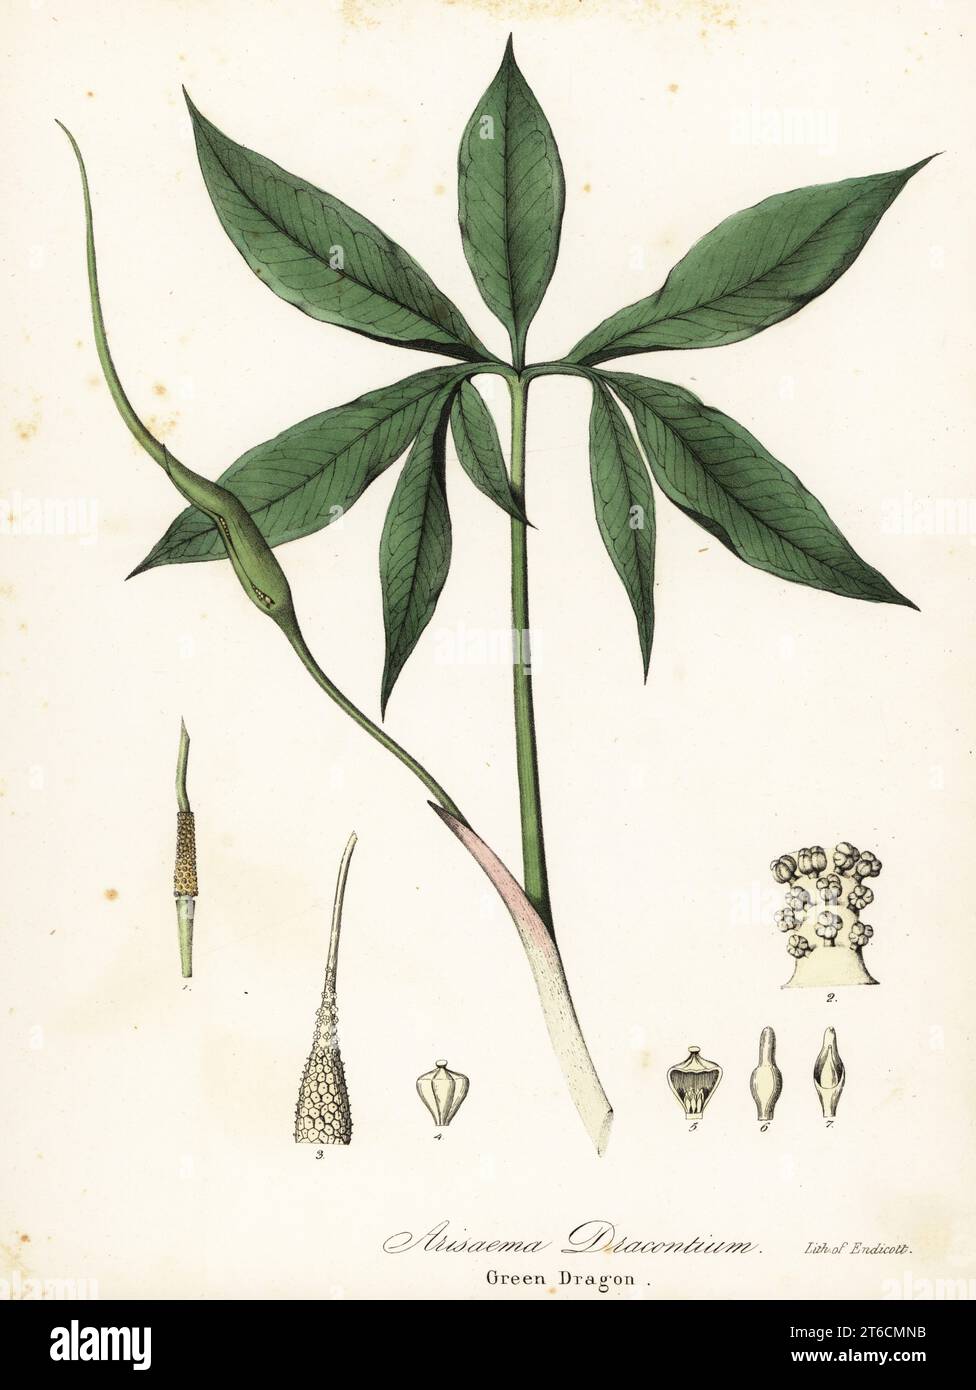 Green dragon or dragon-root, Arisaema dracontium. Handcoloured lithograph by Endicott after a botanical illustration from John Torreys A Flora of the State of New York, Carroll and Cook, Albany, 1843. The plates drawn by John Torrey, Agnes Mitchell, Elizabeth Paoley and Swinton. John Torrey was an American botanist, chemist and physician 1796-1873. Stock Photo